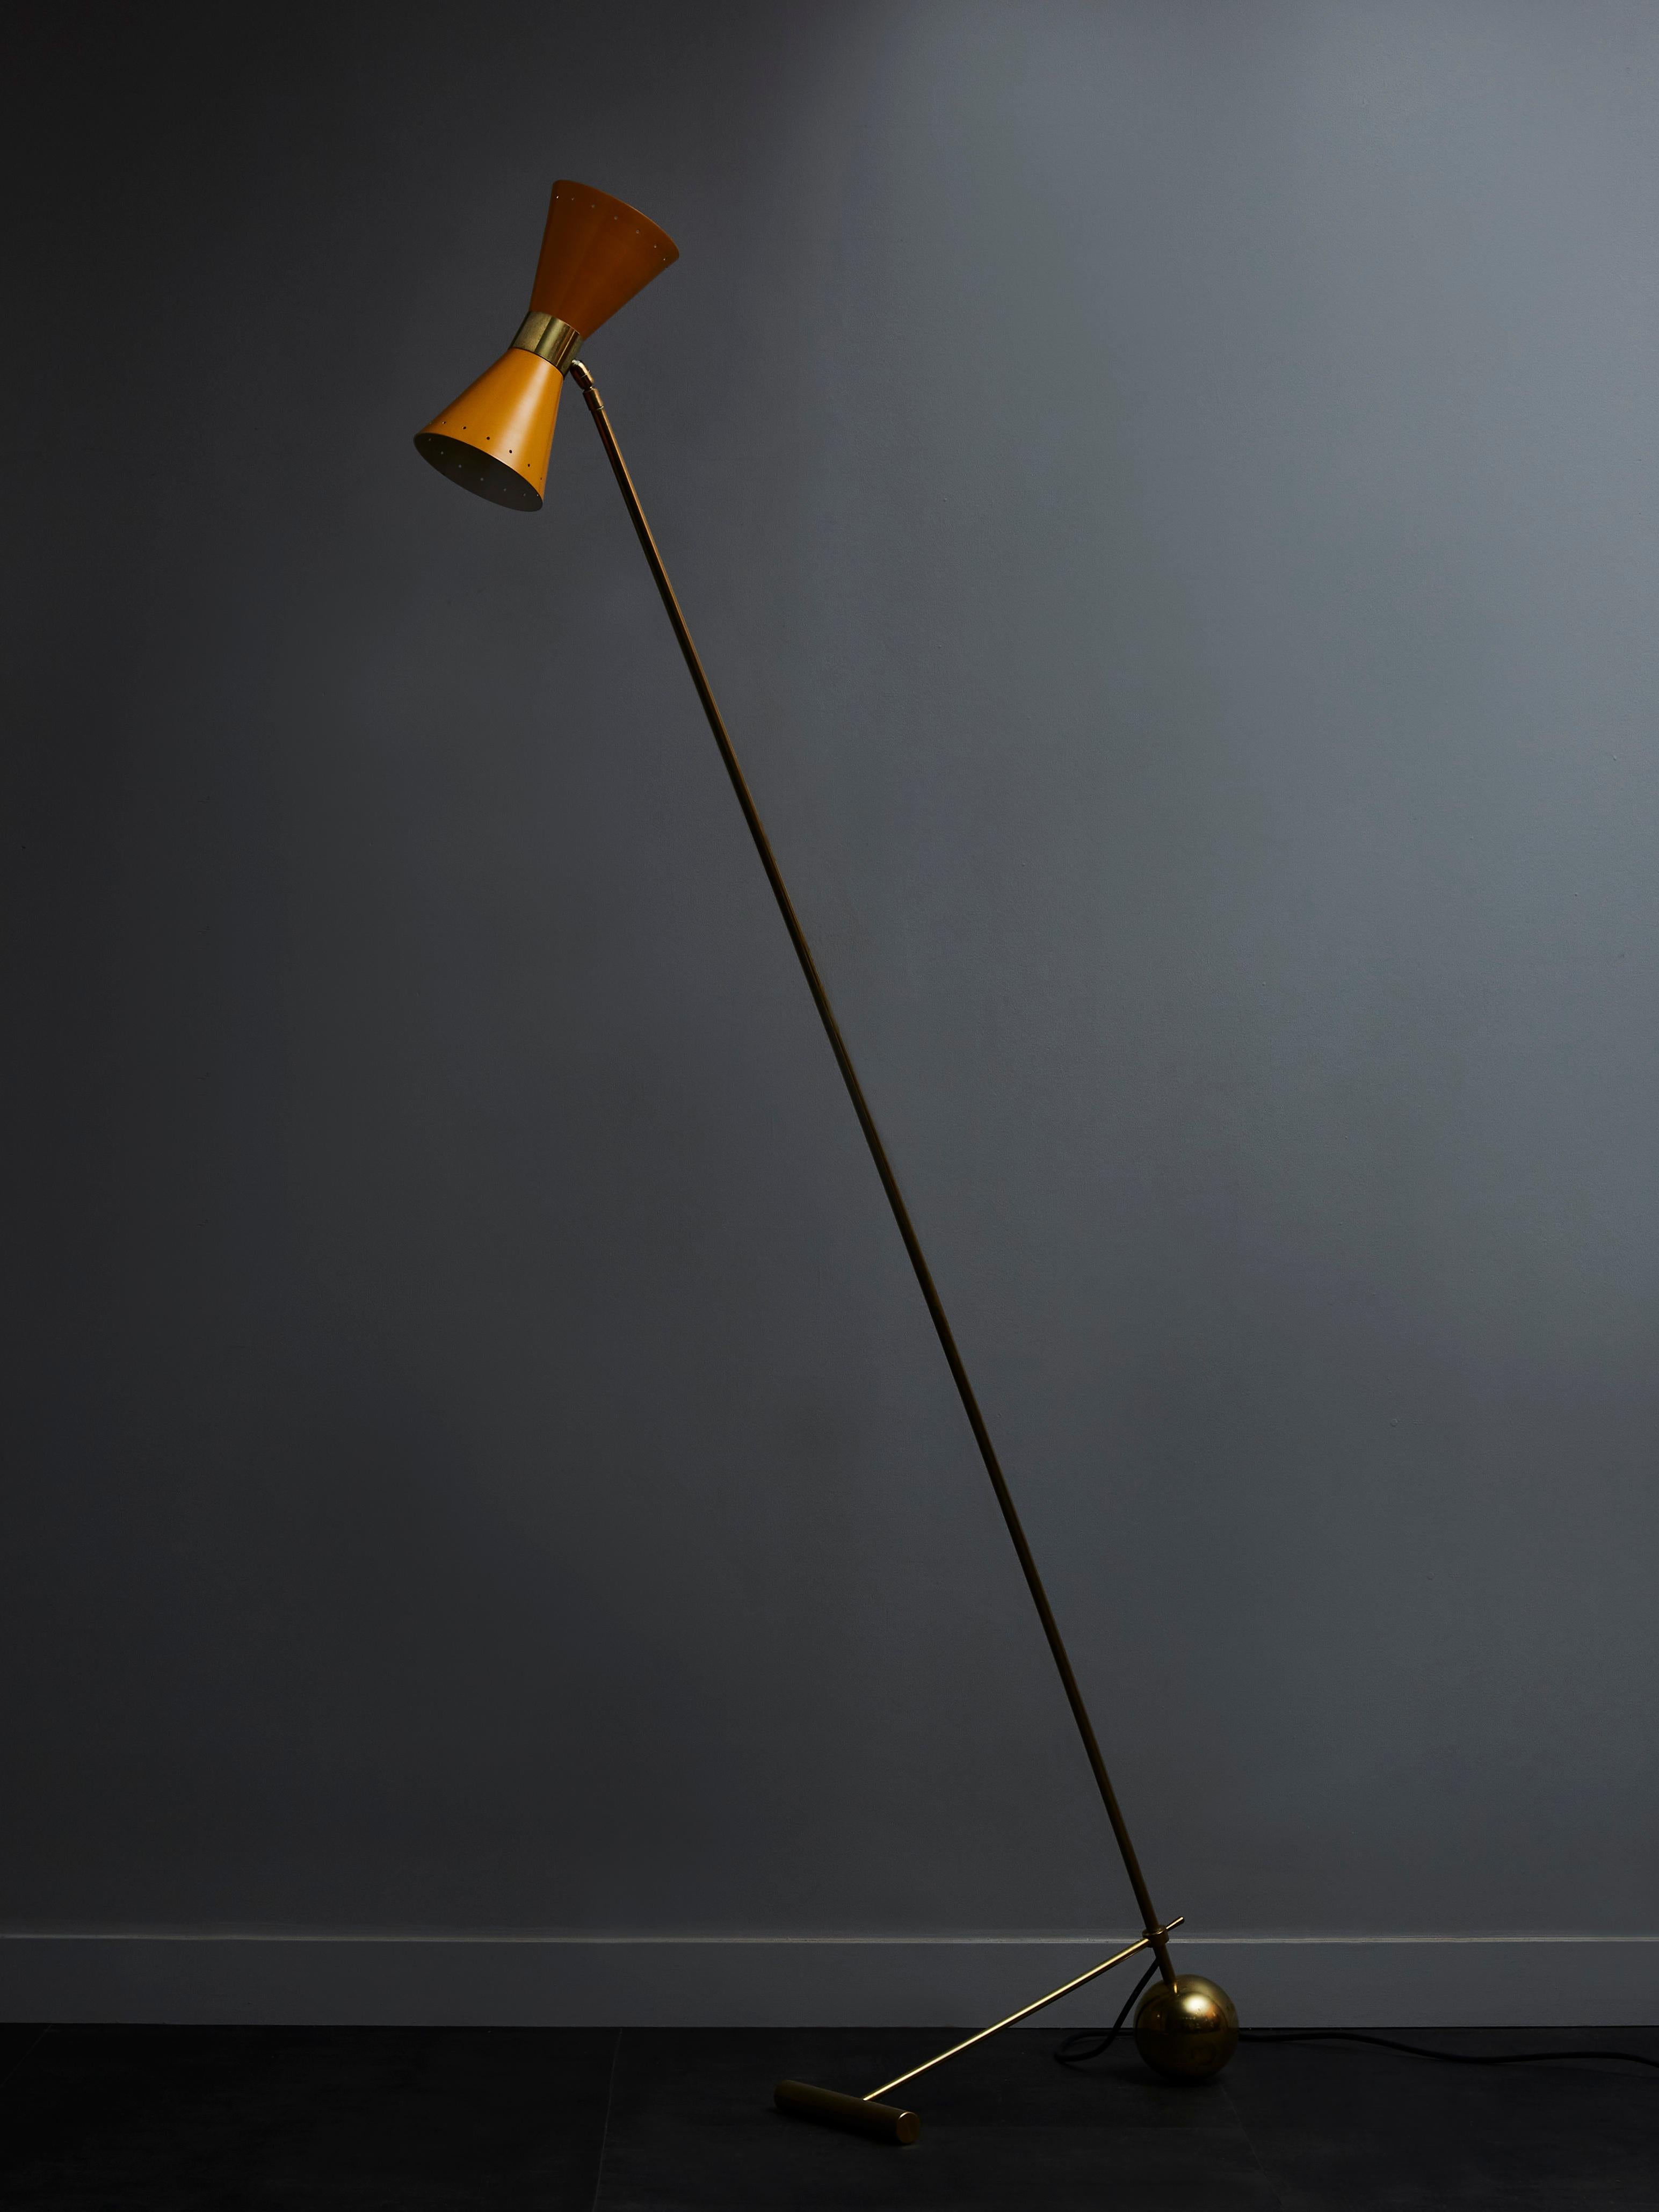 Midcentury style floor lamp made of a long brass arm hold in place by a geometrical foot and holding two yellow cones each hosting a single light.